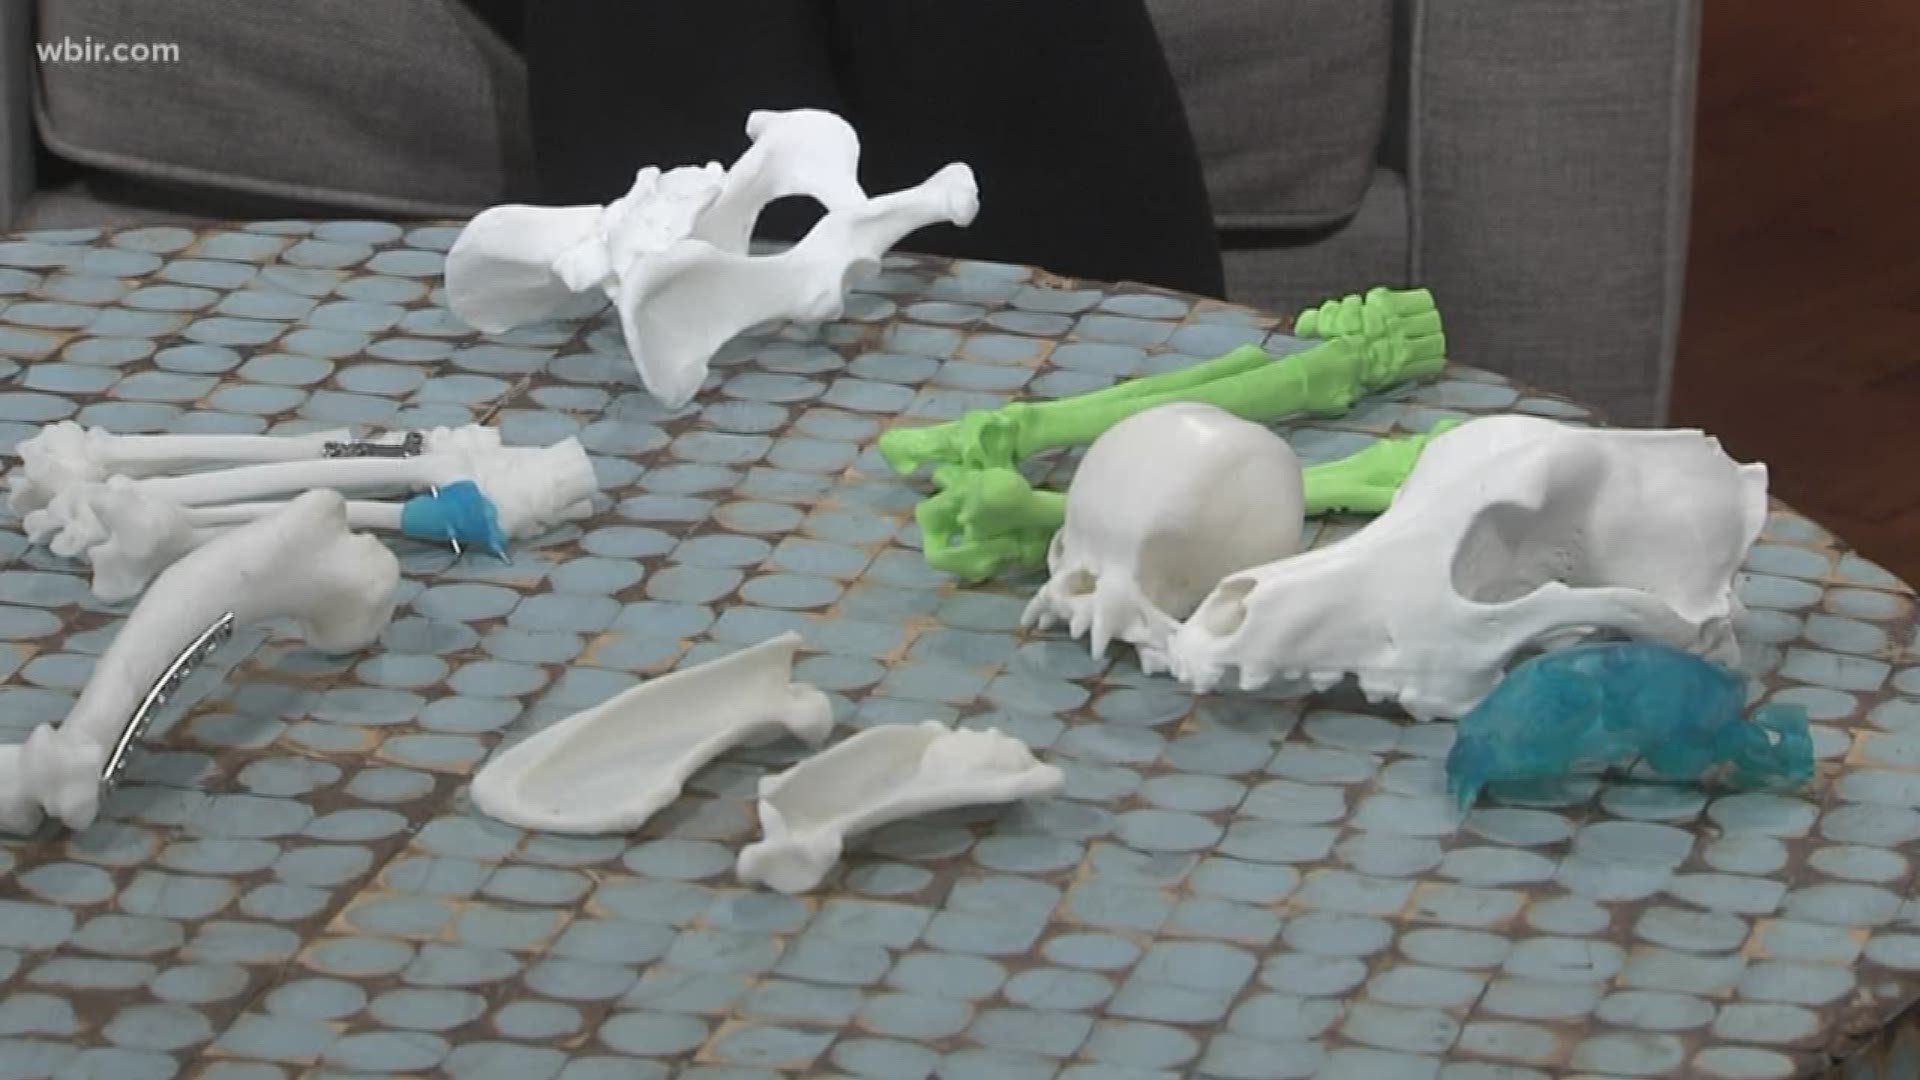 The University of Tennessee uses 3D printing as a teaching tool using them to make models of bones. Jan. 22, 2019-4pm